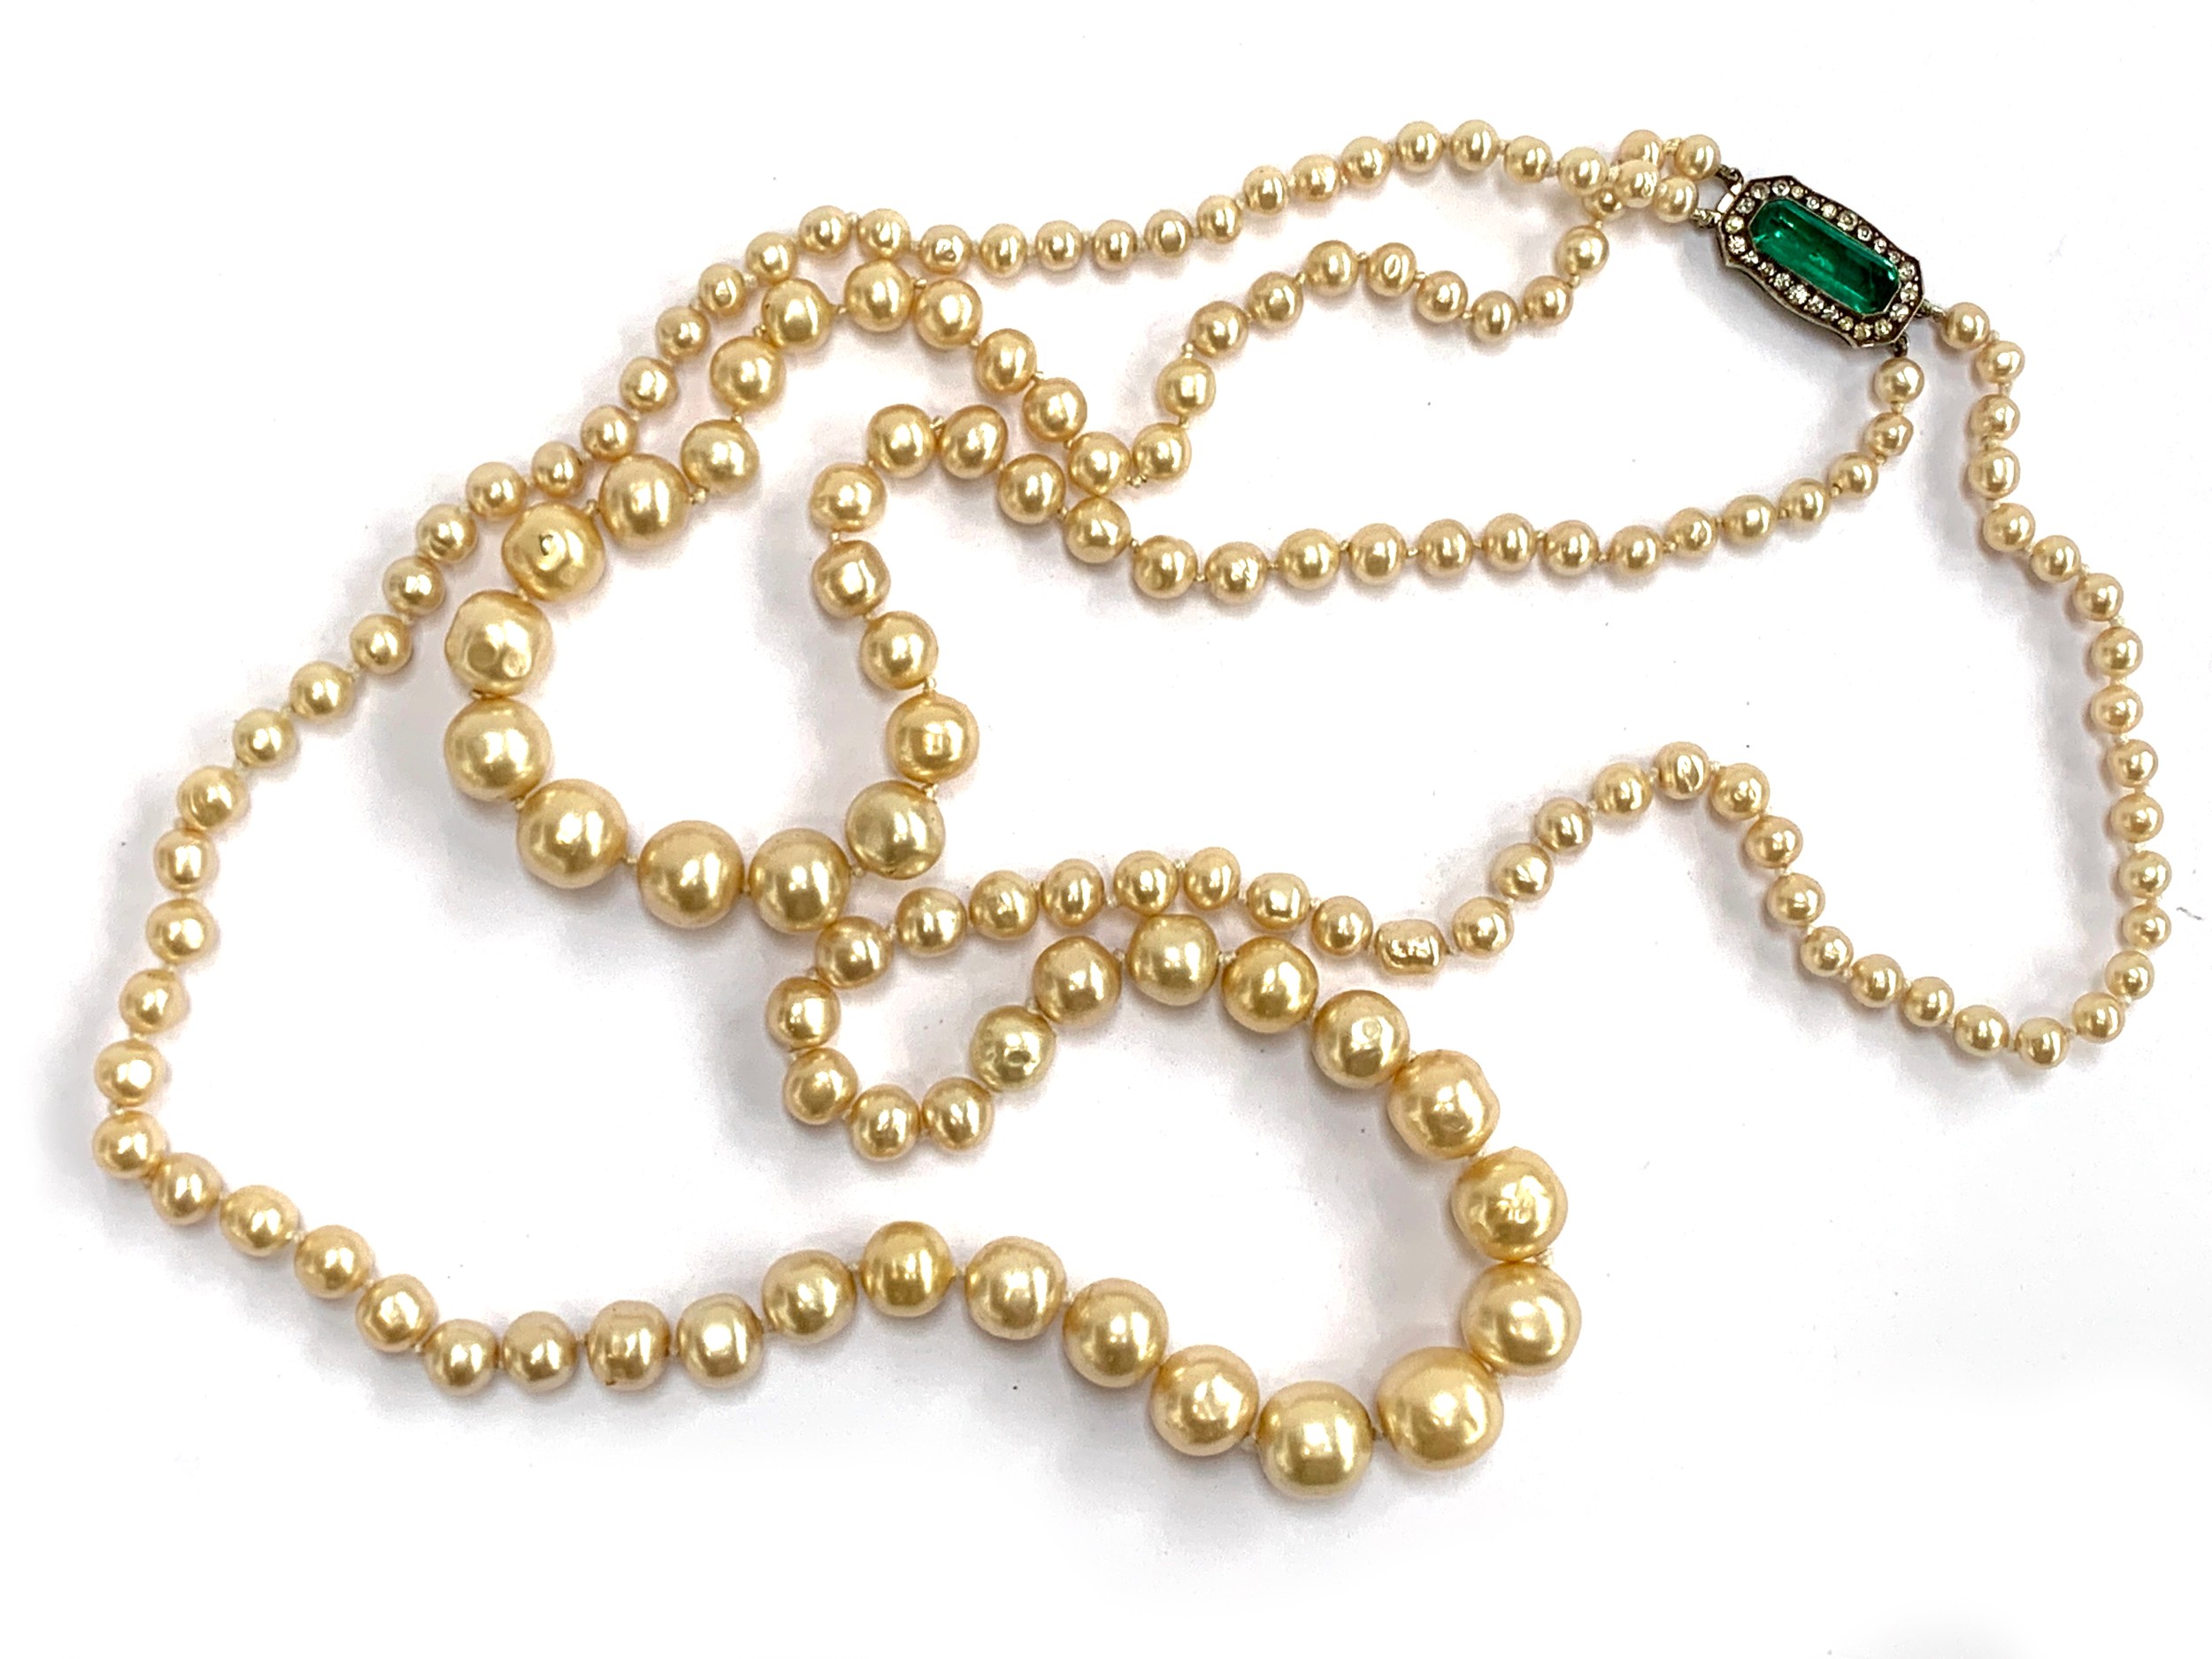 An early 20th century good quality faux pearl double strand necklace, fastening with a silver